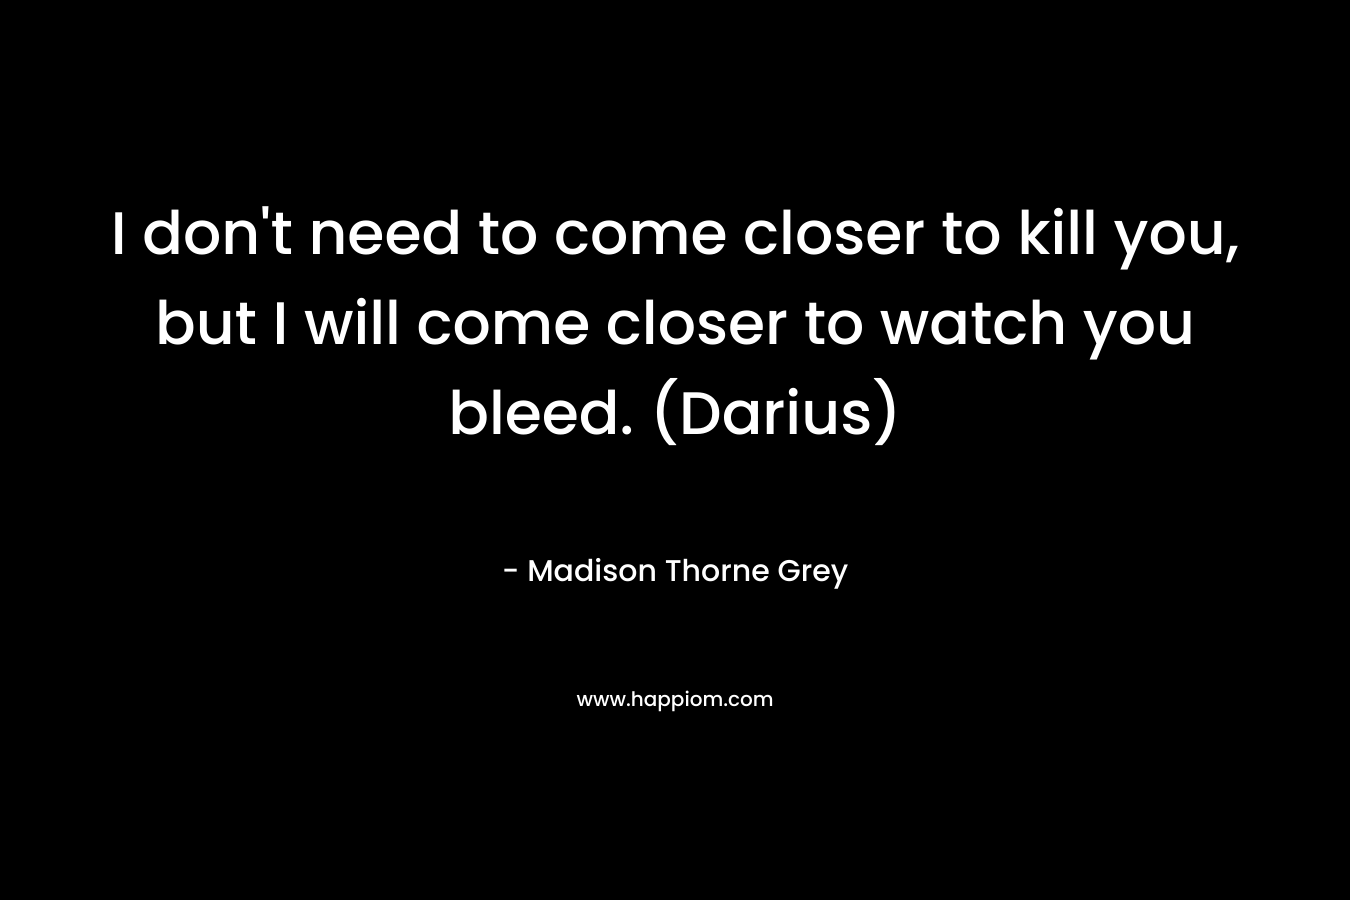 I don't need to come closer to kill you, but I will come closer to watch you bleed. (Darius)